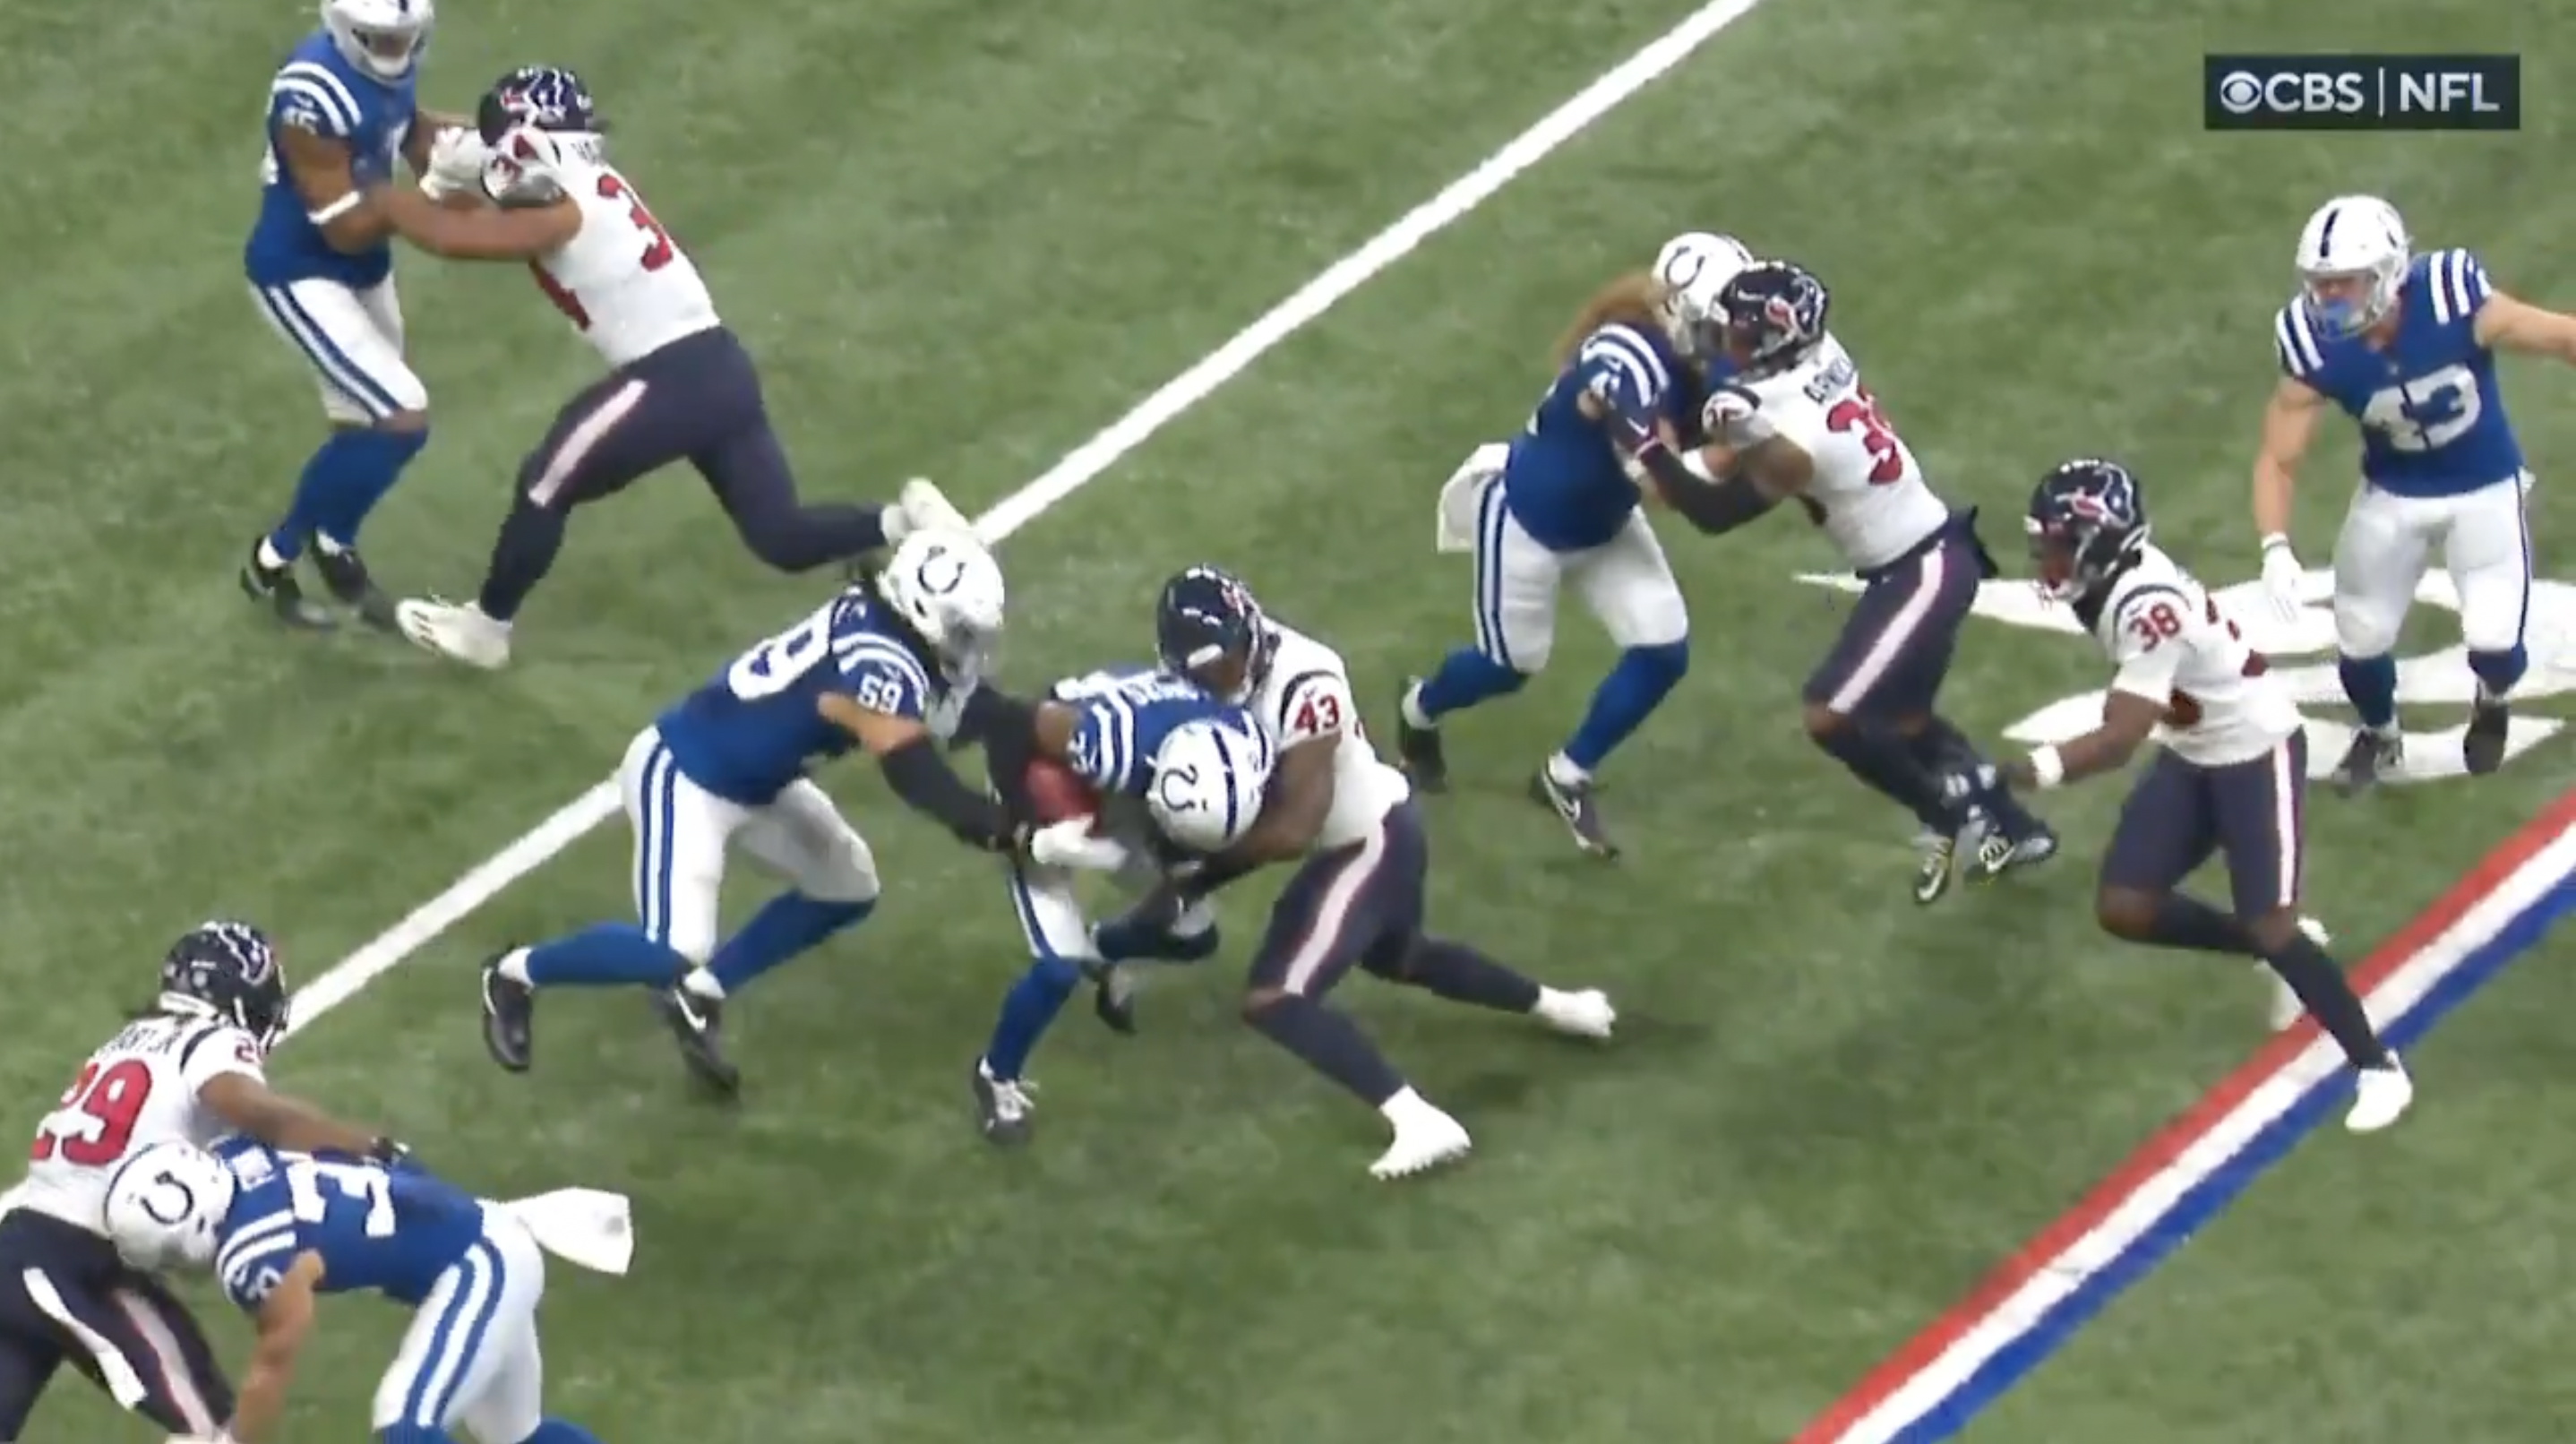 A Colts Player Forced His Own Teammate To Fumble The Ball During Game vs  Texans - Daily Snark